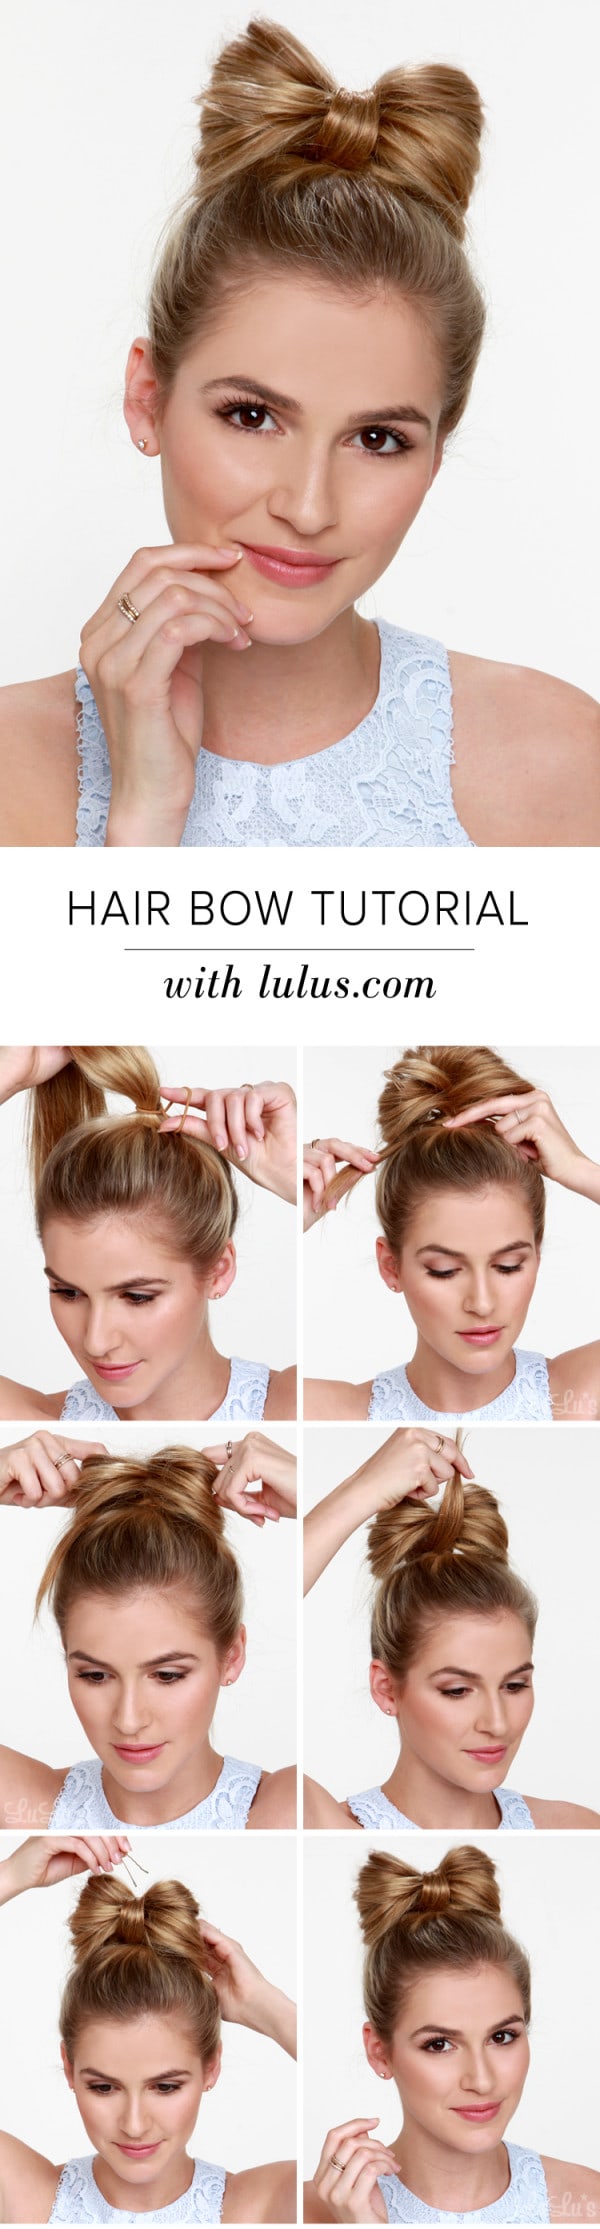 15 Fantastic DIY Ways To Make A Modern Hairstyle In Just a ...